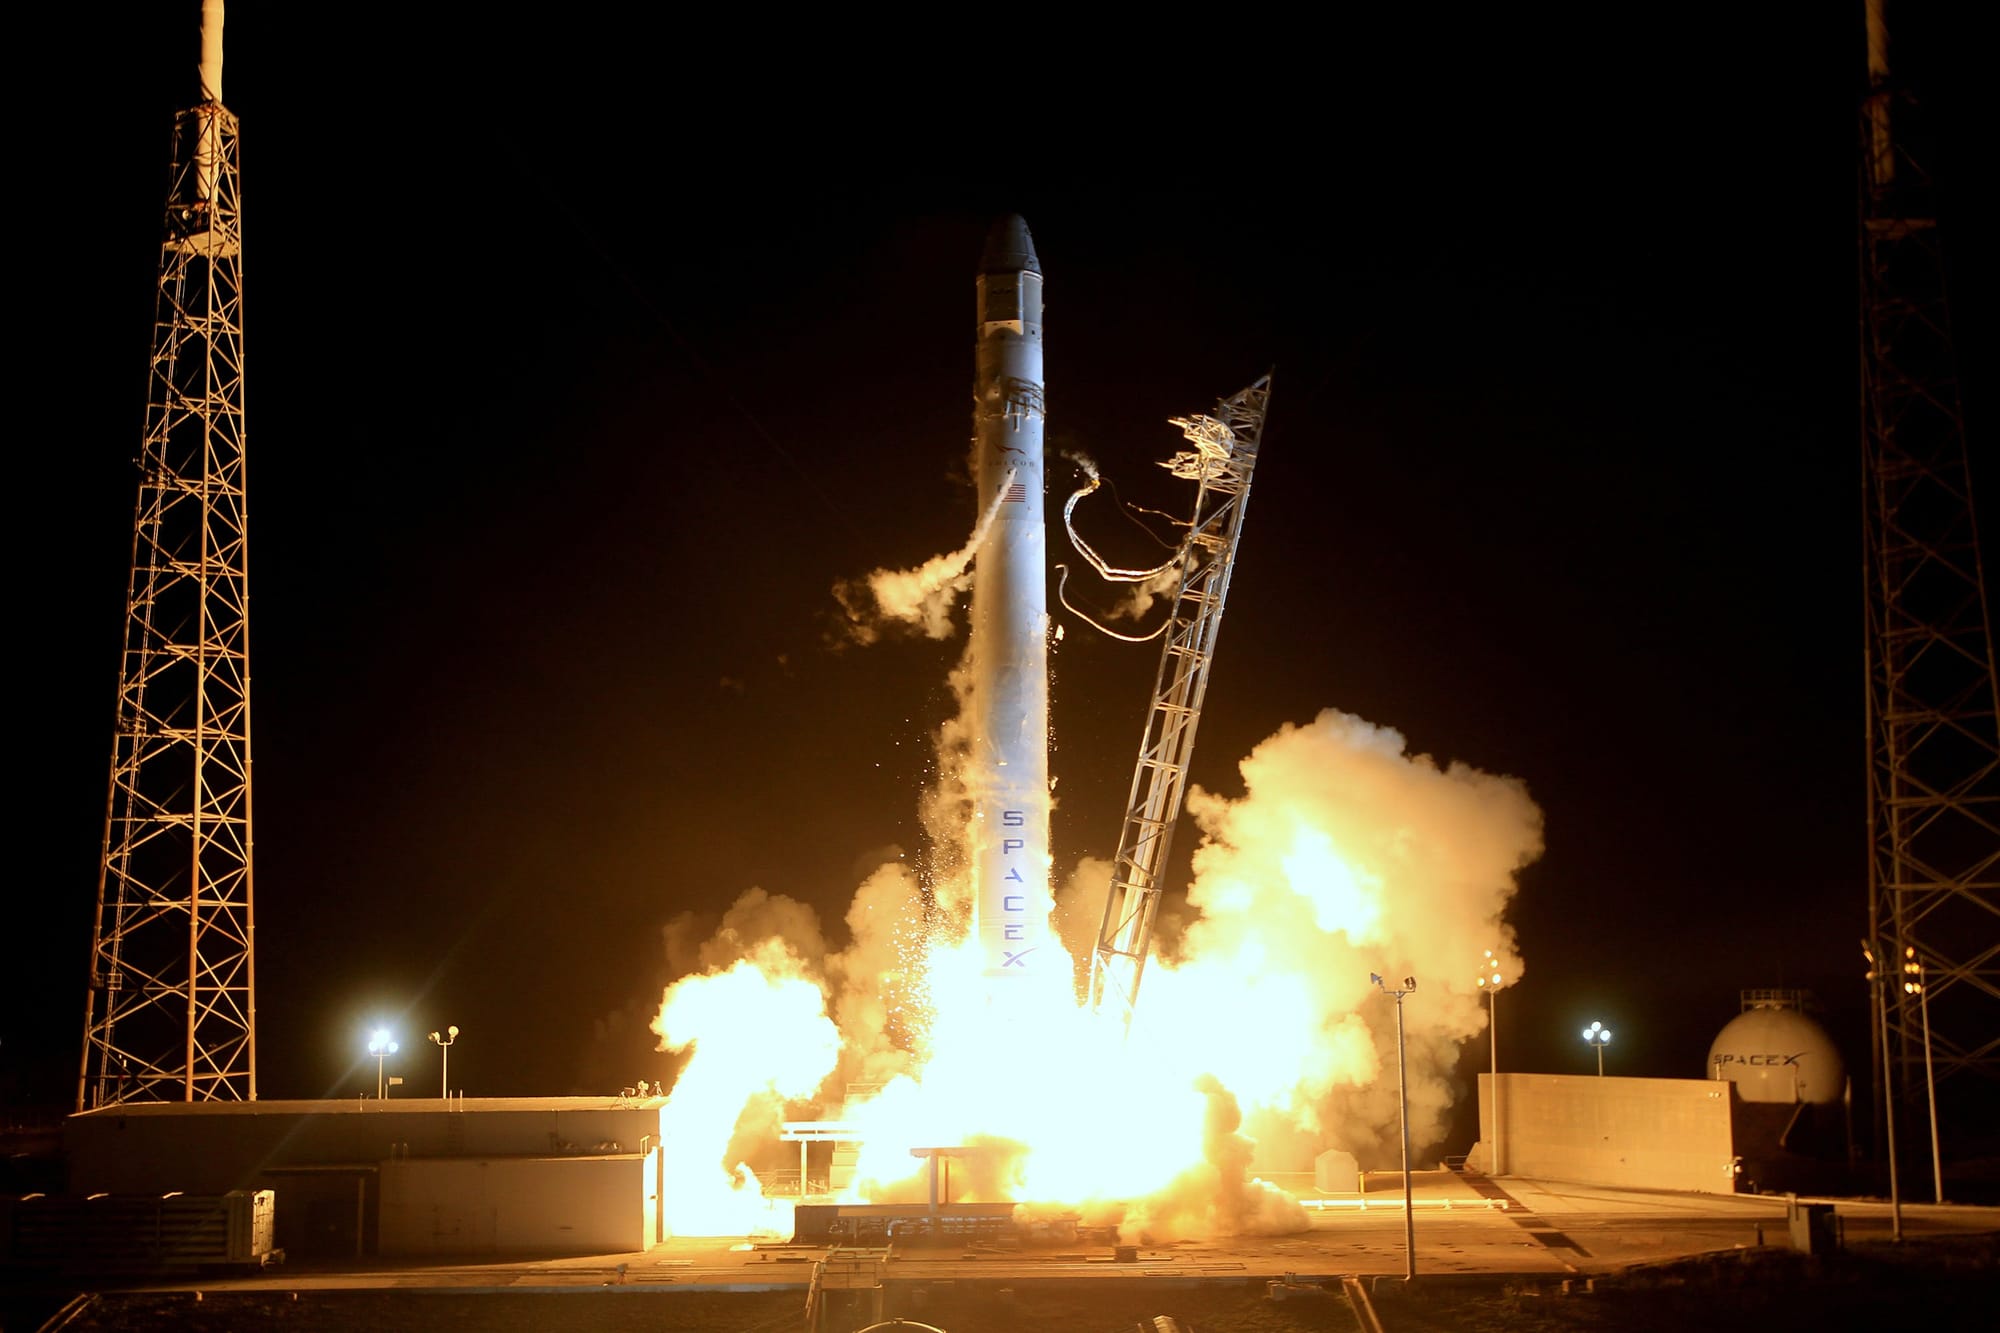 Launching into the Future: SpaceX is propelling towards new heights in Space Travel